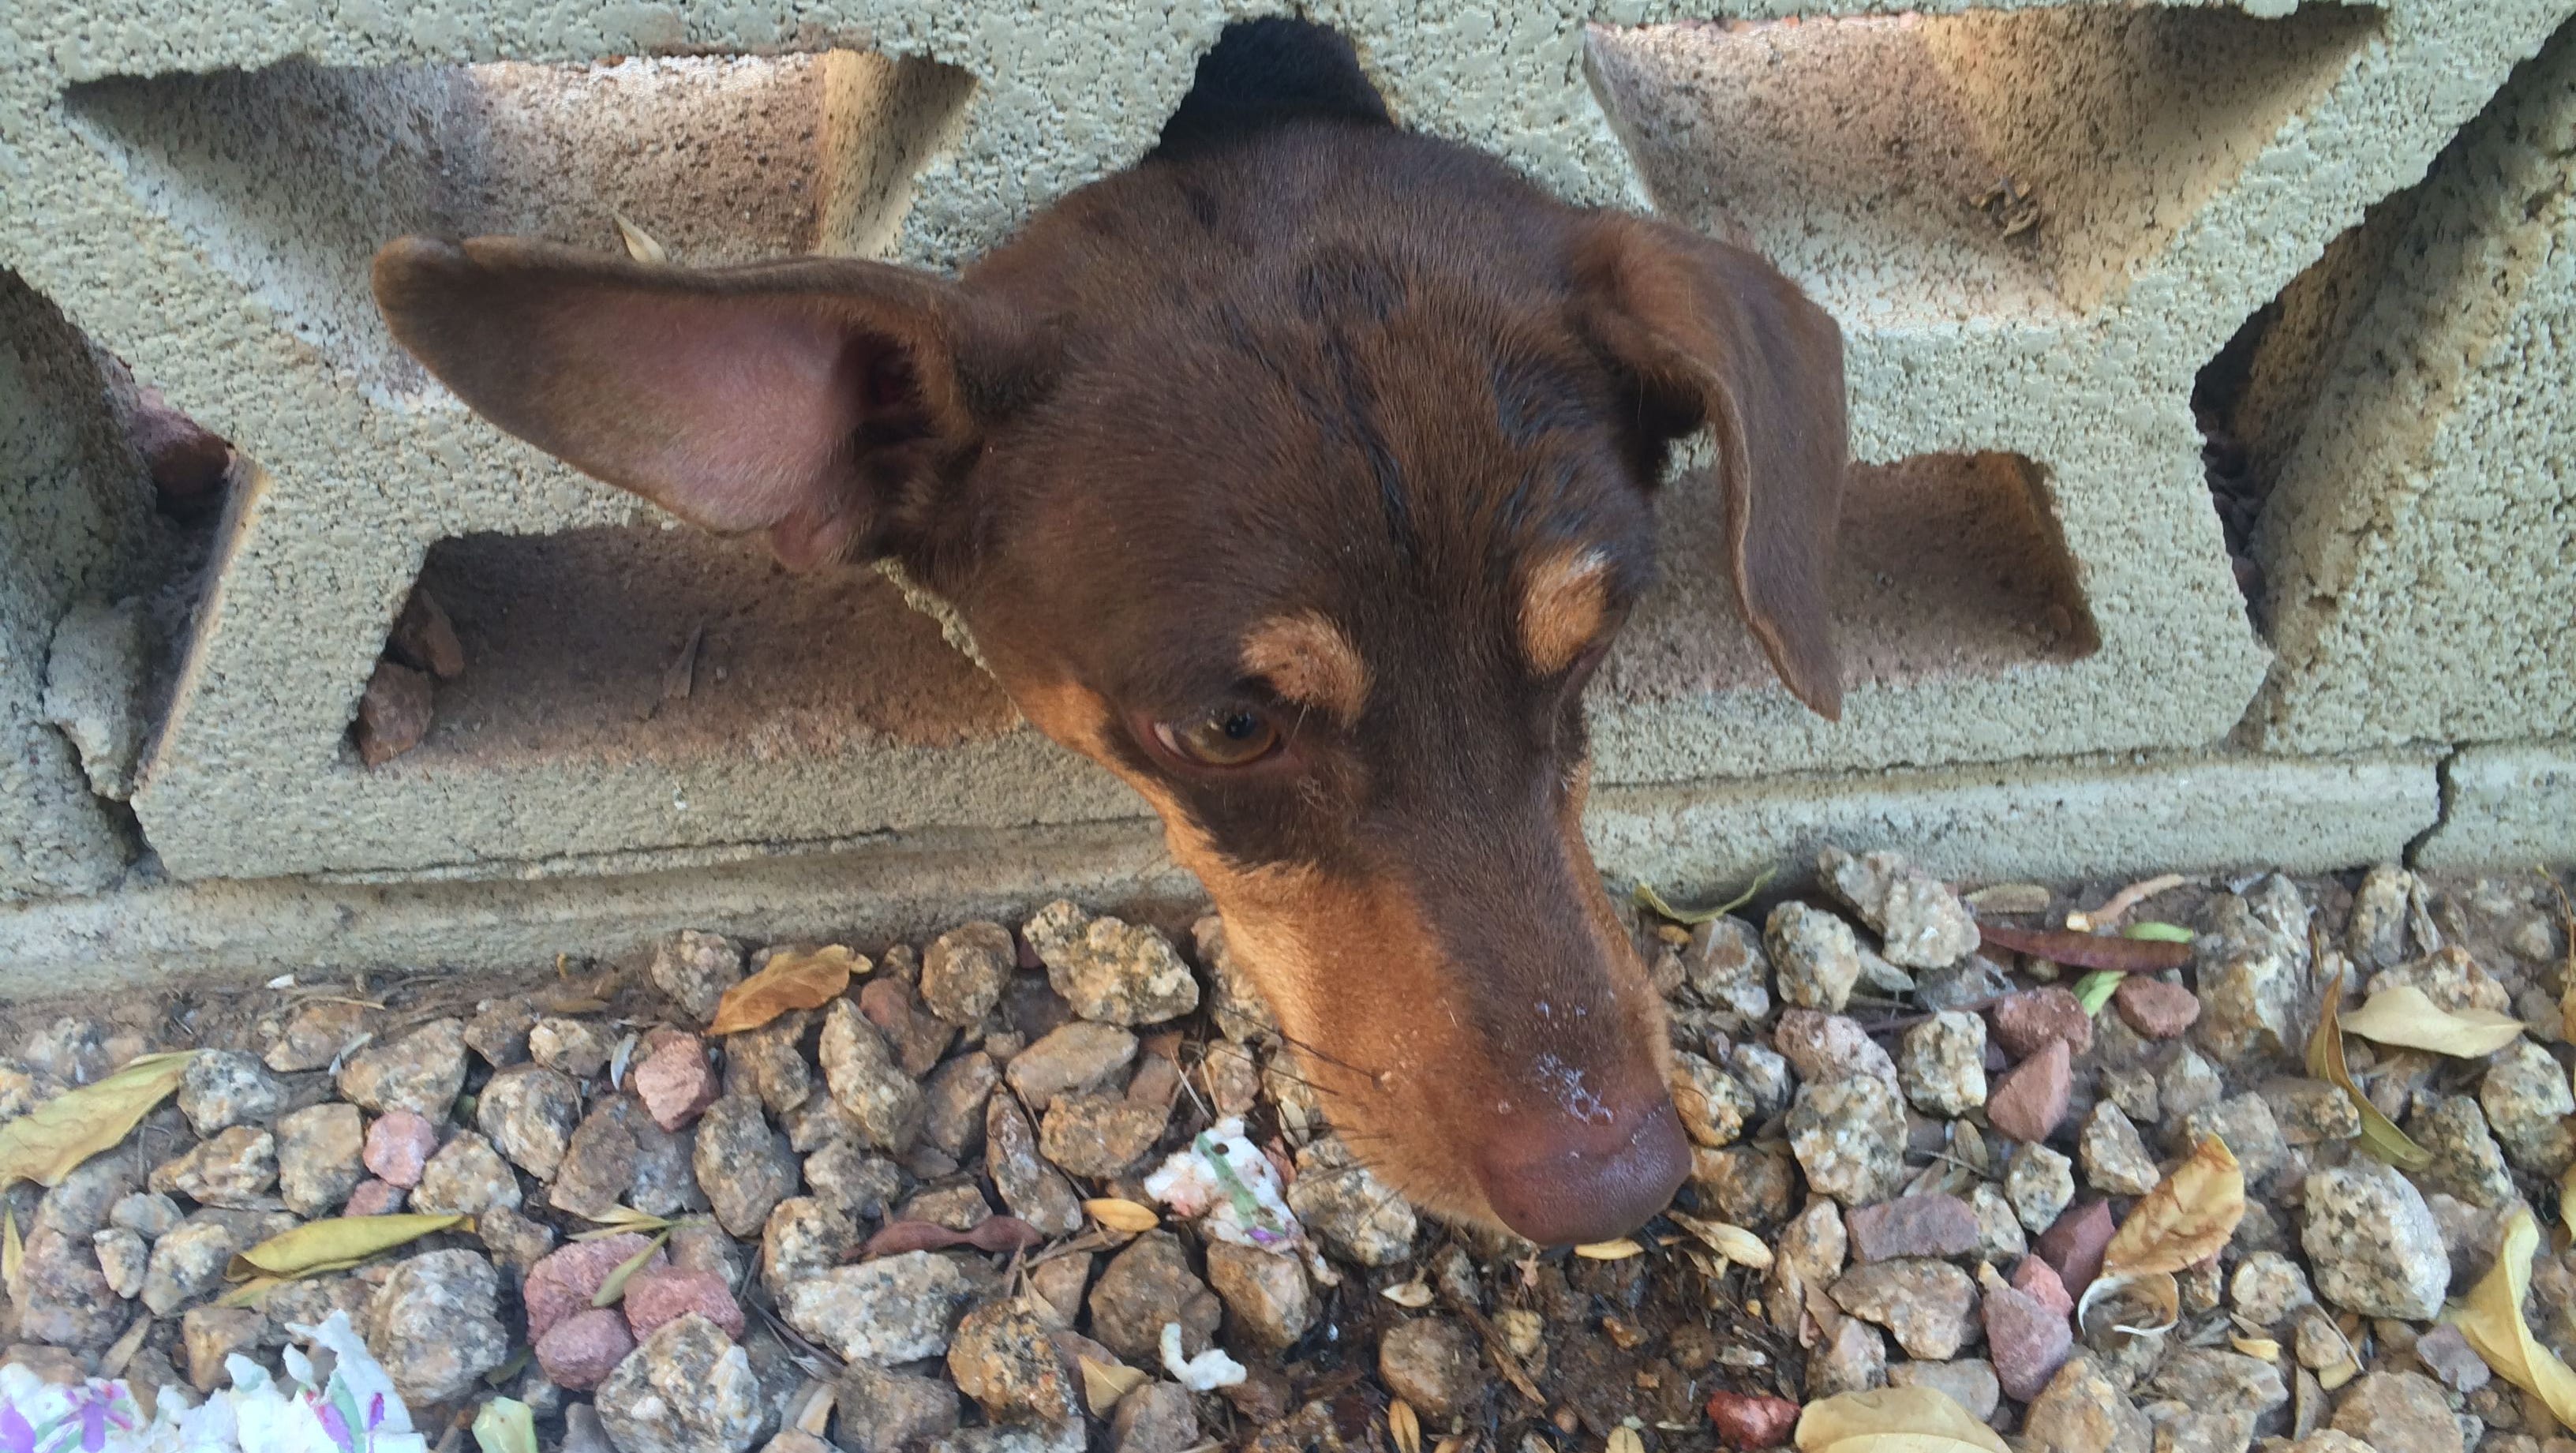 Phoenix firefighters rescue dog stuck in wall overnight